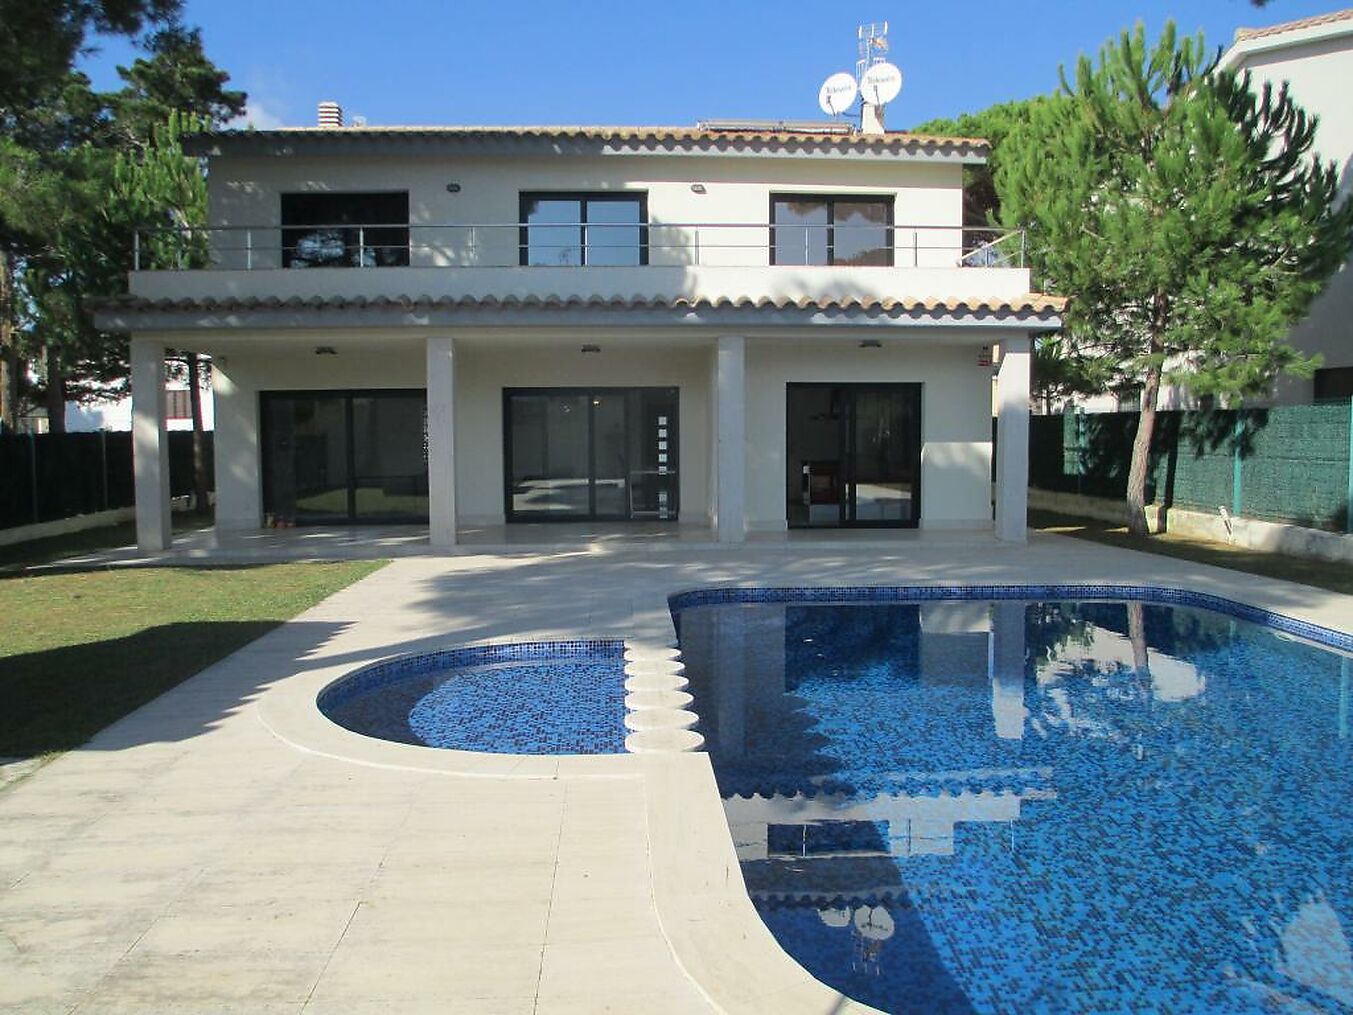 Modern Villa in the beautiful town of S 'Agaró.